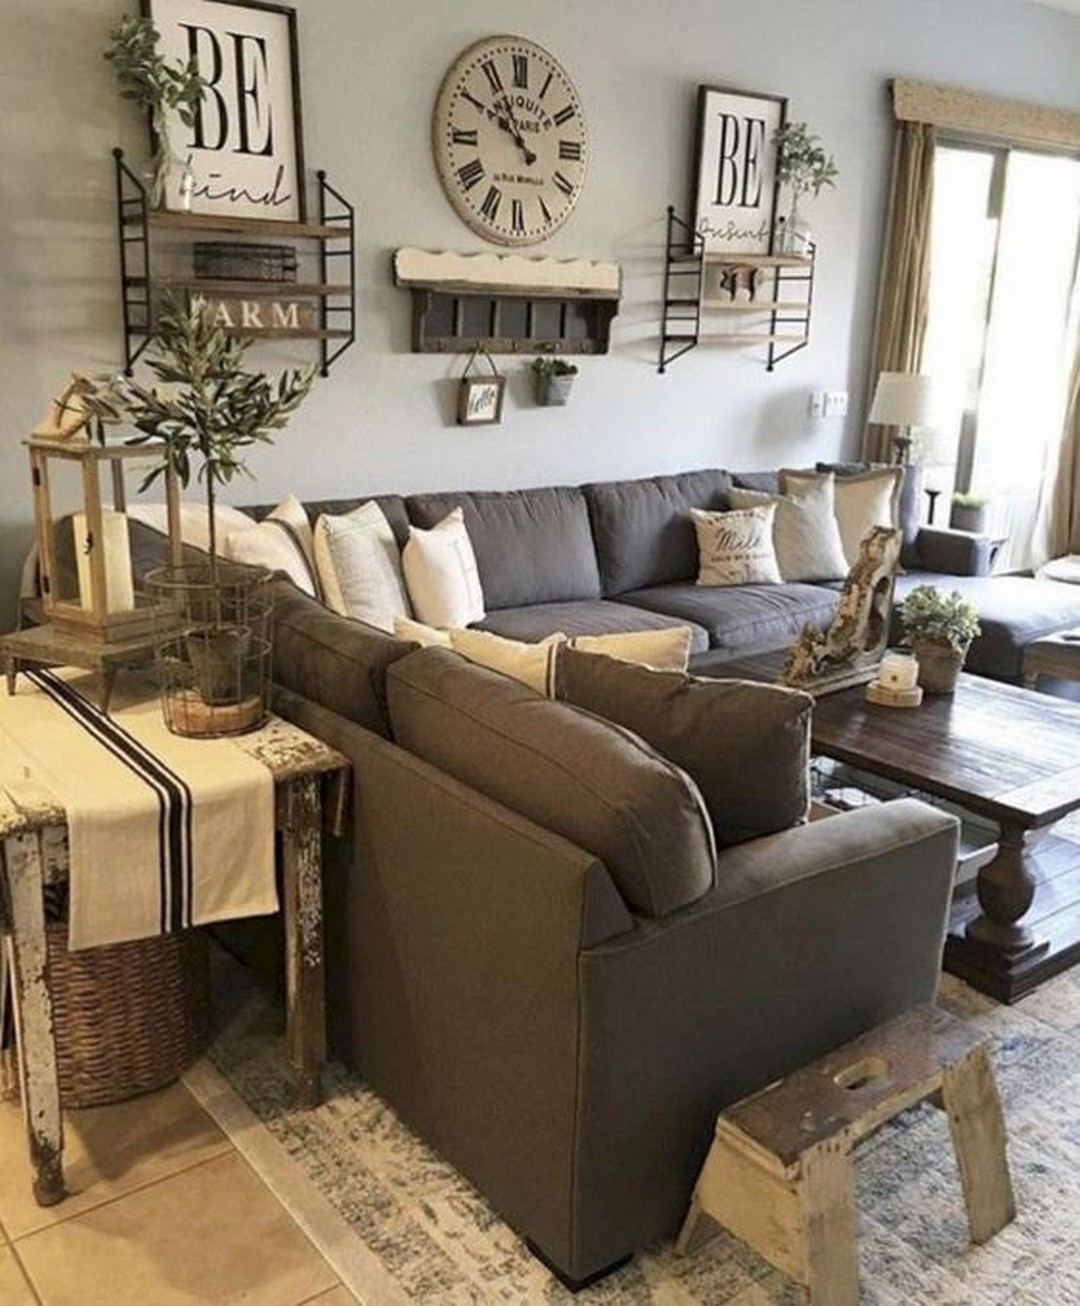 Farmhouse Living Room
 Get Inspired to These Country Farmhouse Living Room to